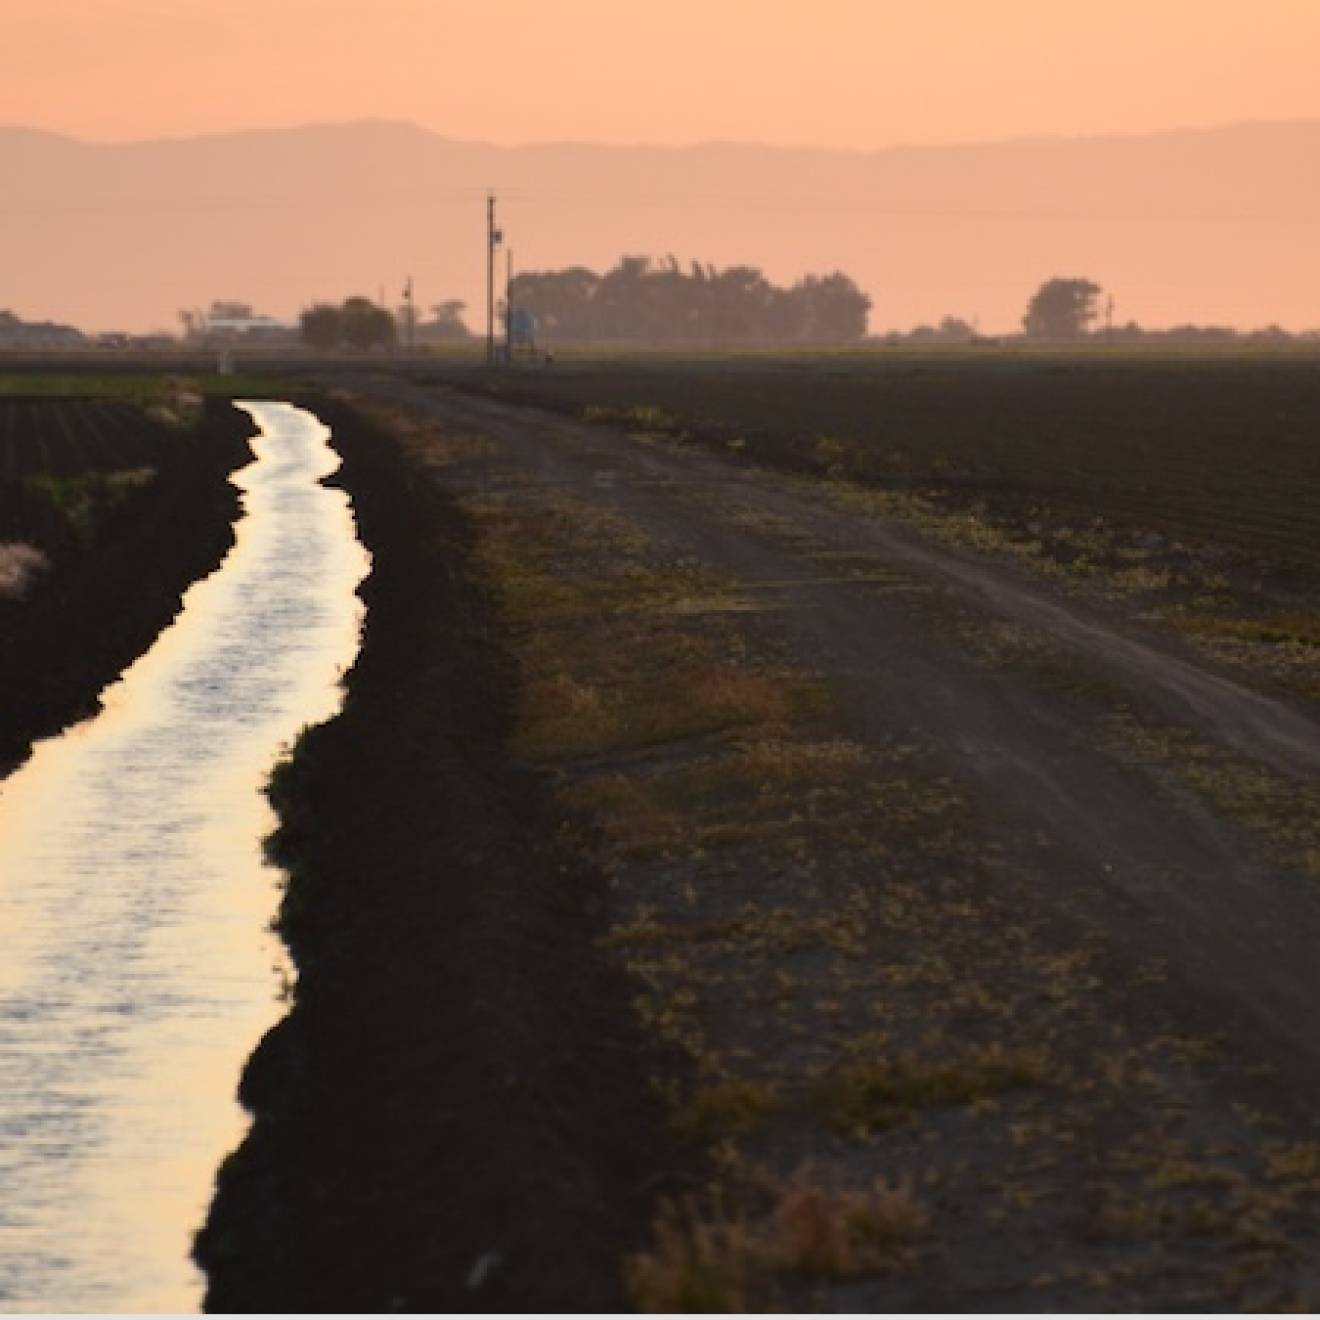 A irrigation canal runs away from the camera to a vanishing point. The fields on either side are dark, the canal reflects the orange-pink hazy sky